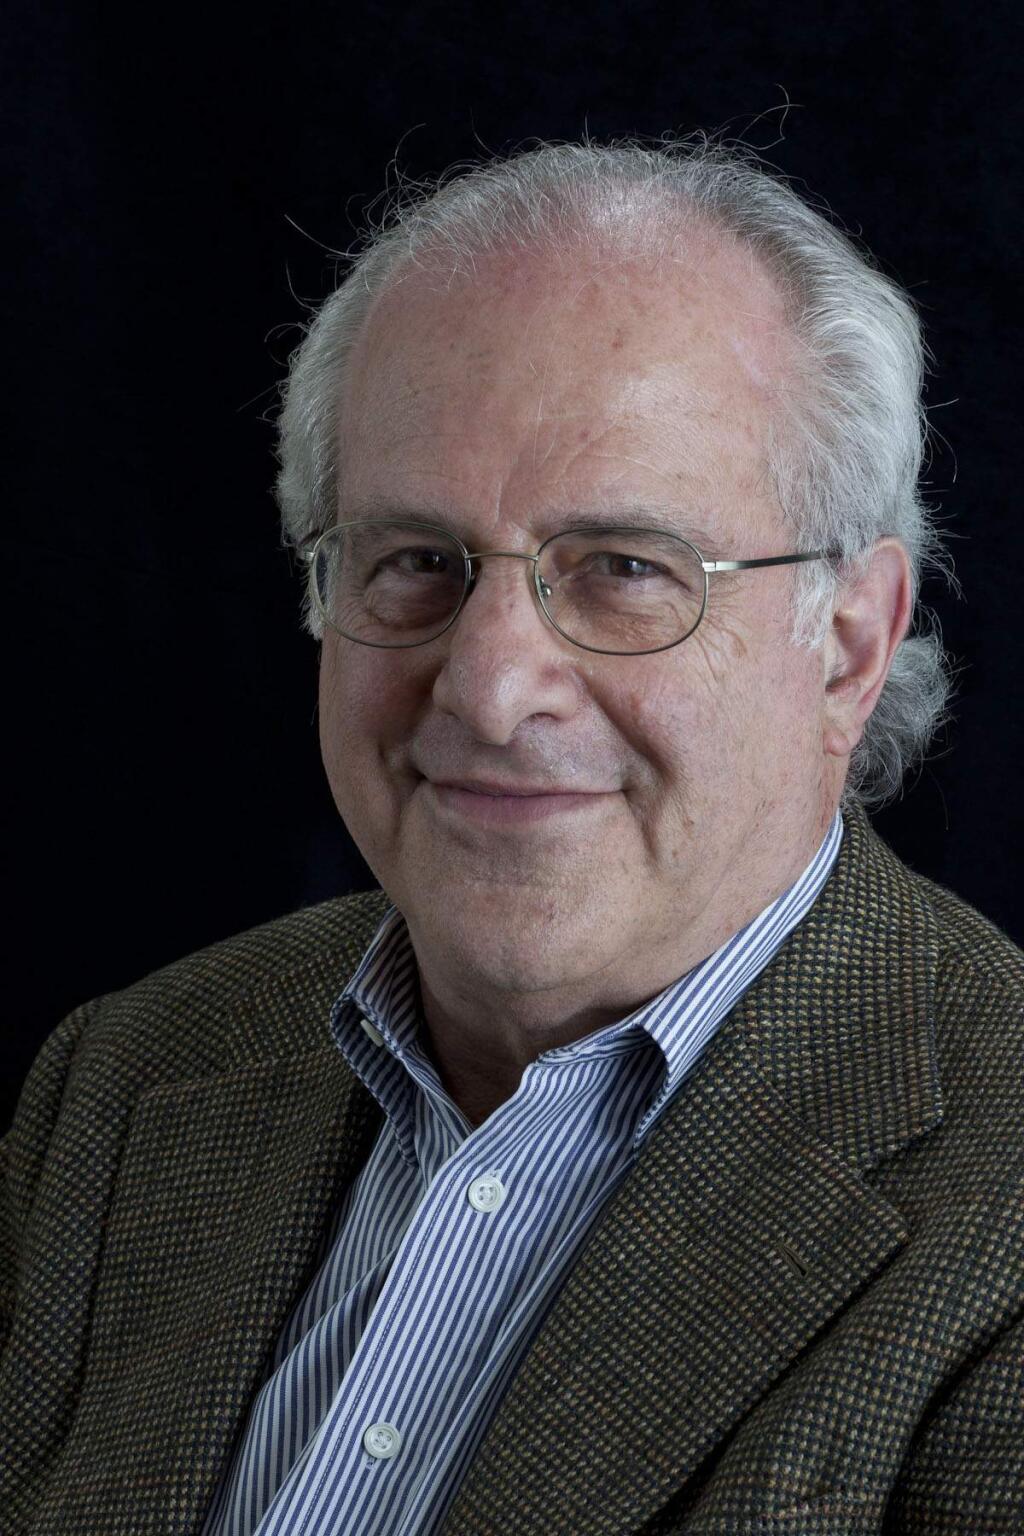 ECONOMIC HISTORIAN Richard Wolff will speak on the depression both economic and psychological, with his wife Harriet Fraad, at the Vintage House on Feb. 14. (Submitted photo)